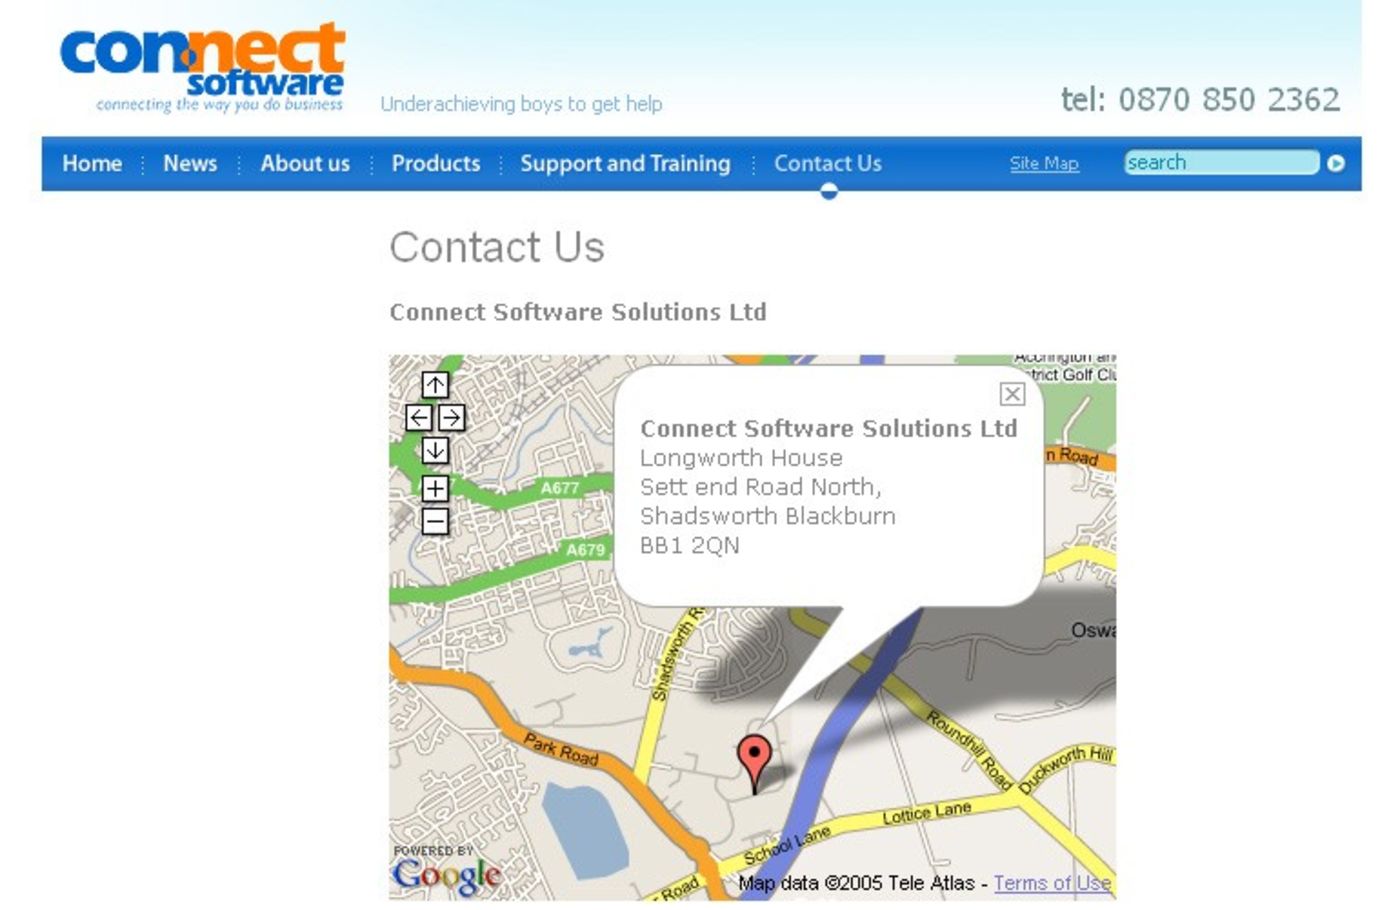 Connect Software Solutions Ltd Contact us page